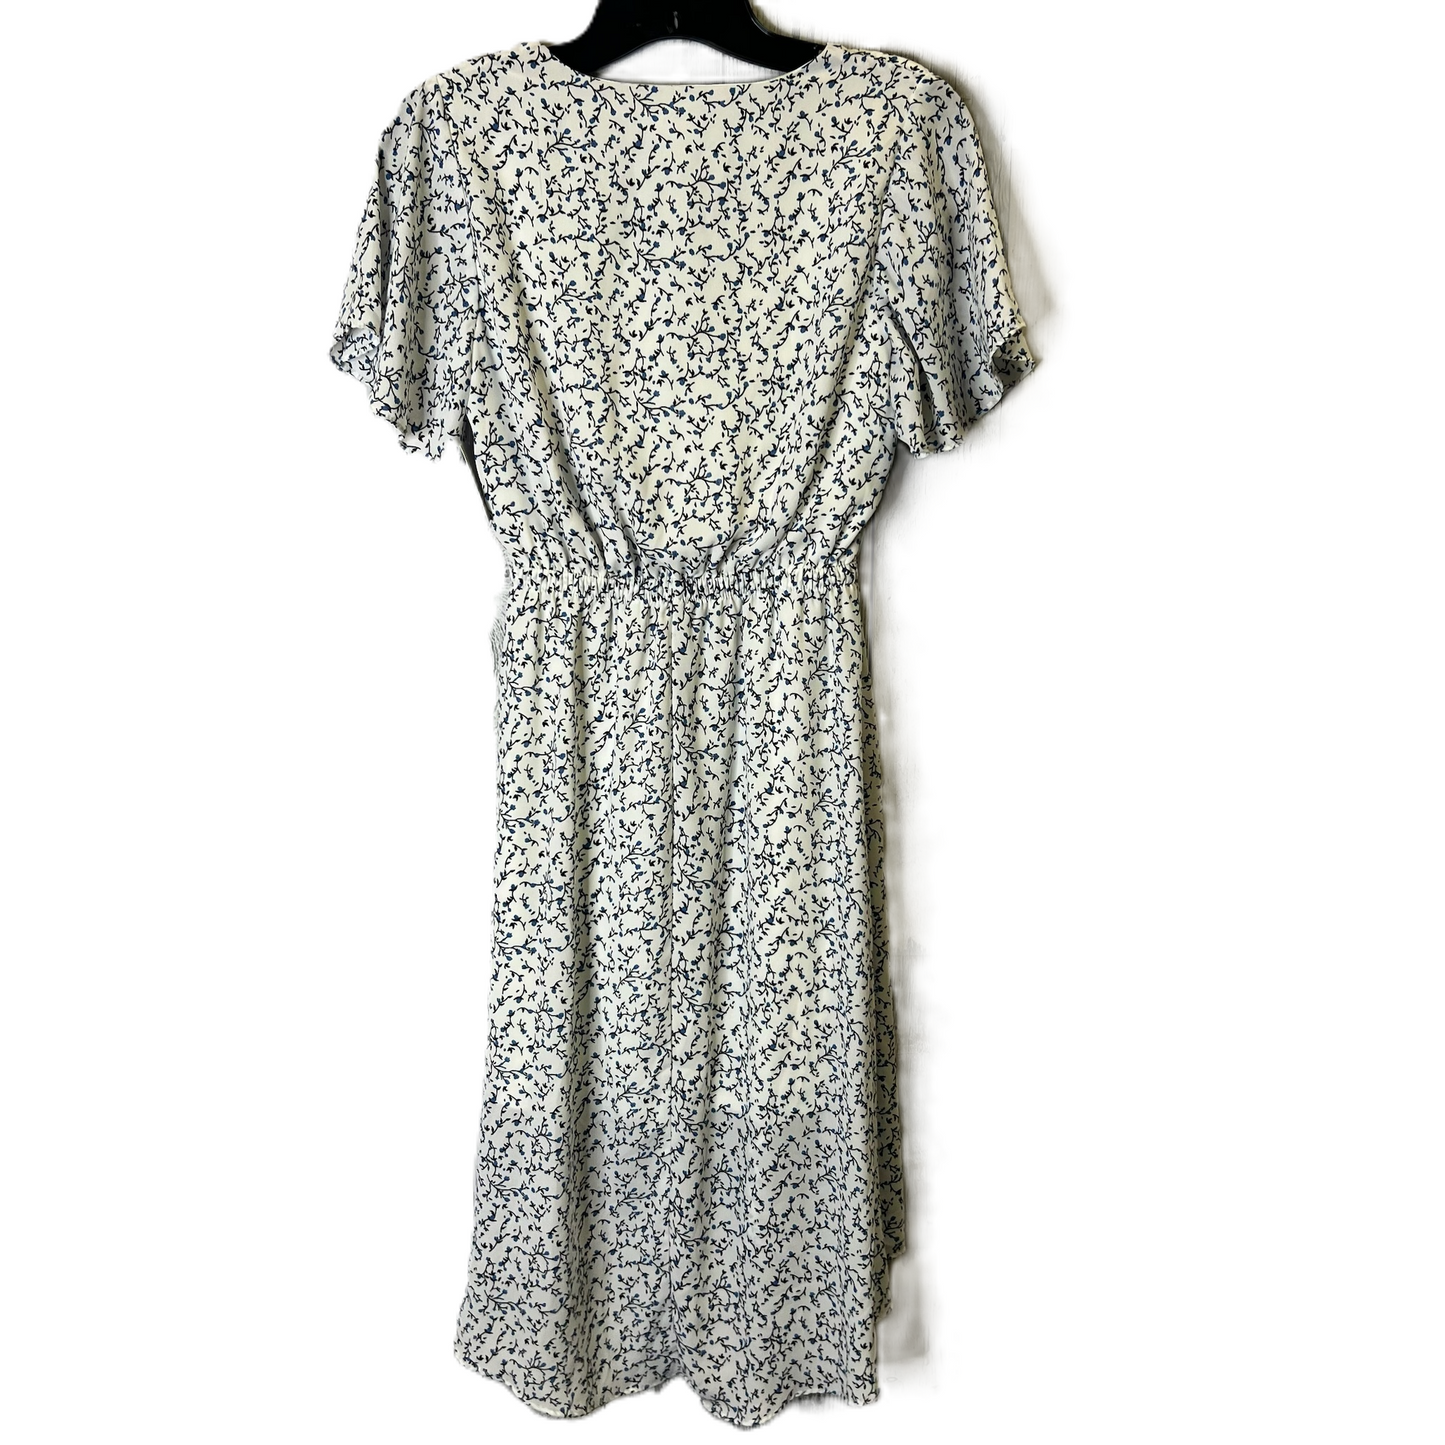 Floral Print Dress Casual Short By Sienna Sky, Size: S